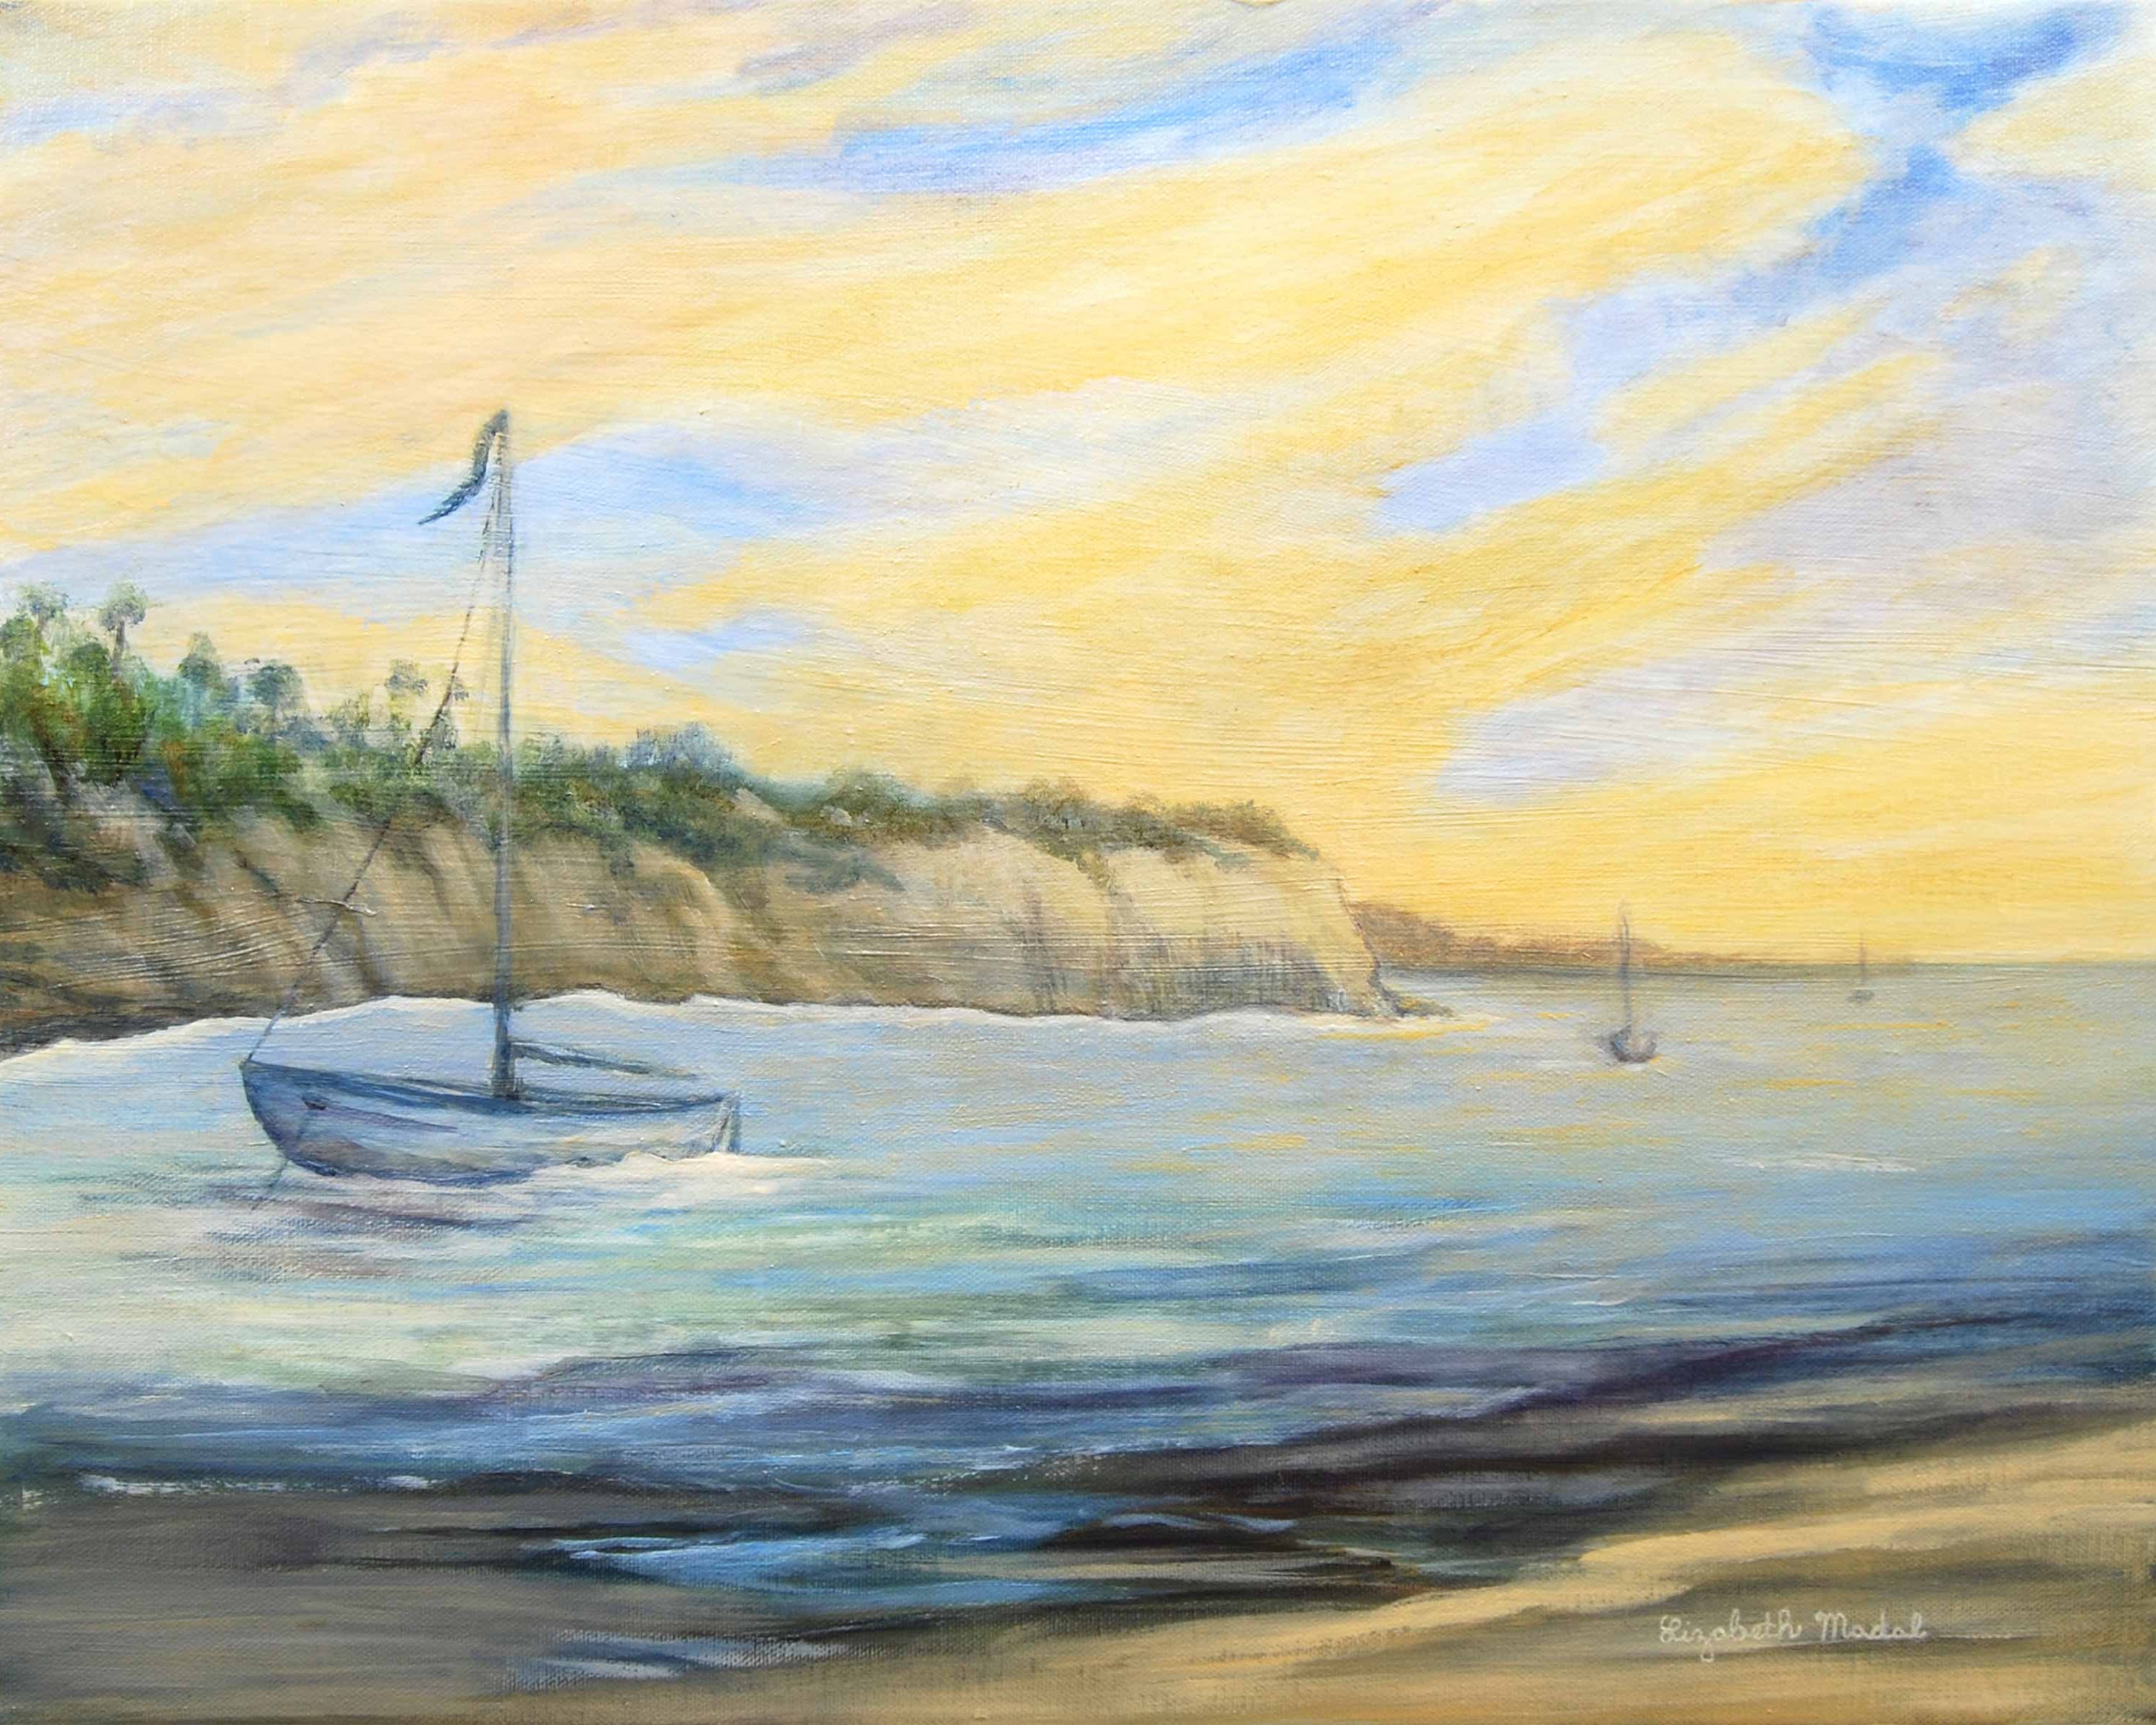 An anchored boat on shore with a blue and yellow sky.